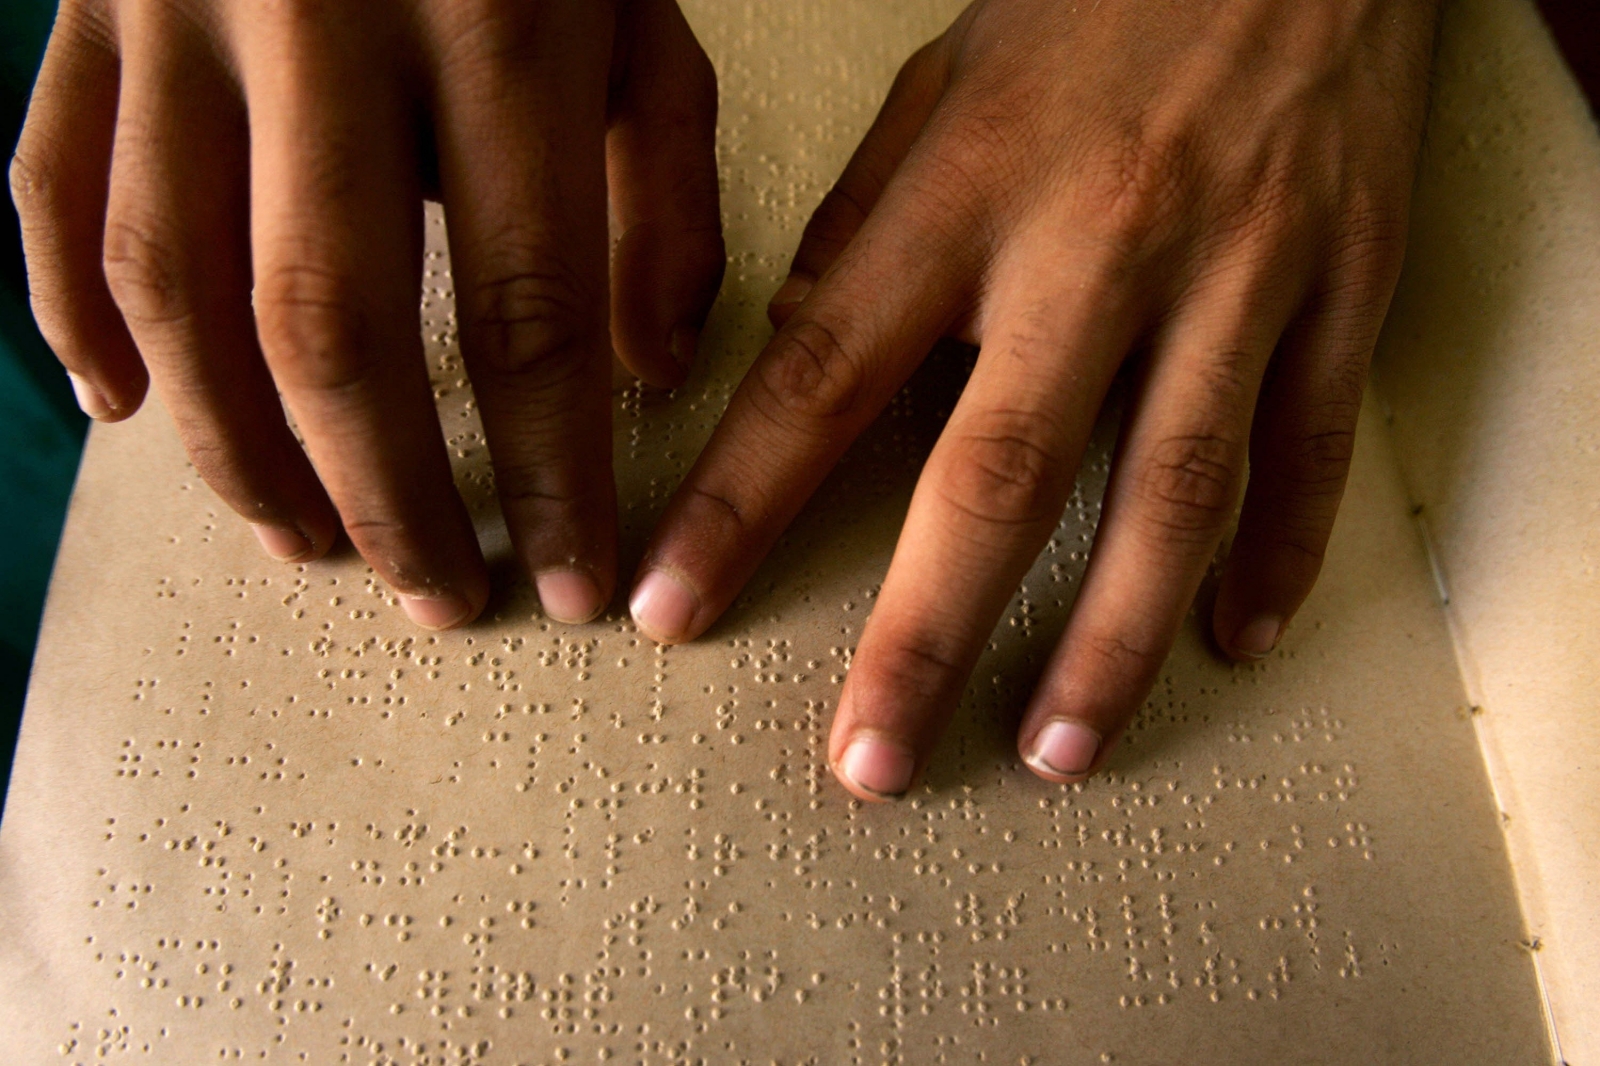 world-braille-day-2017-who-invented-braille-and-why